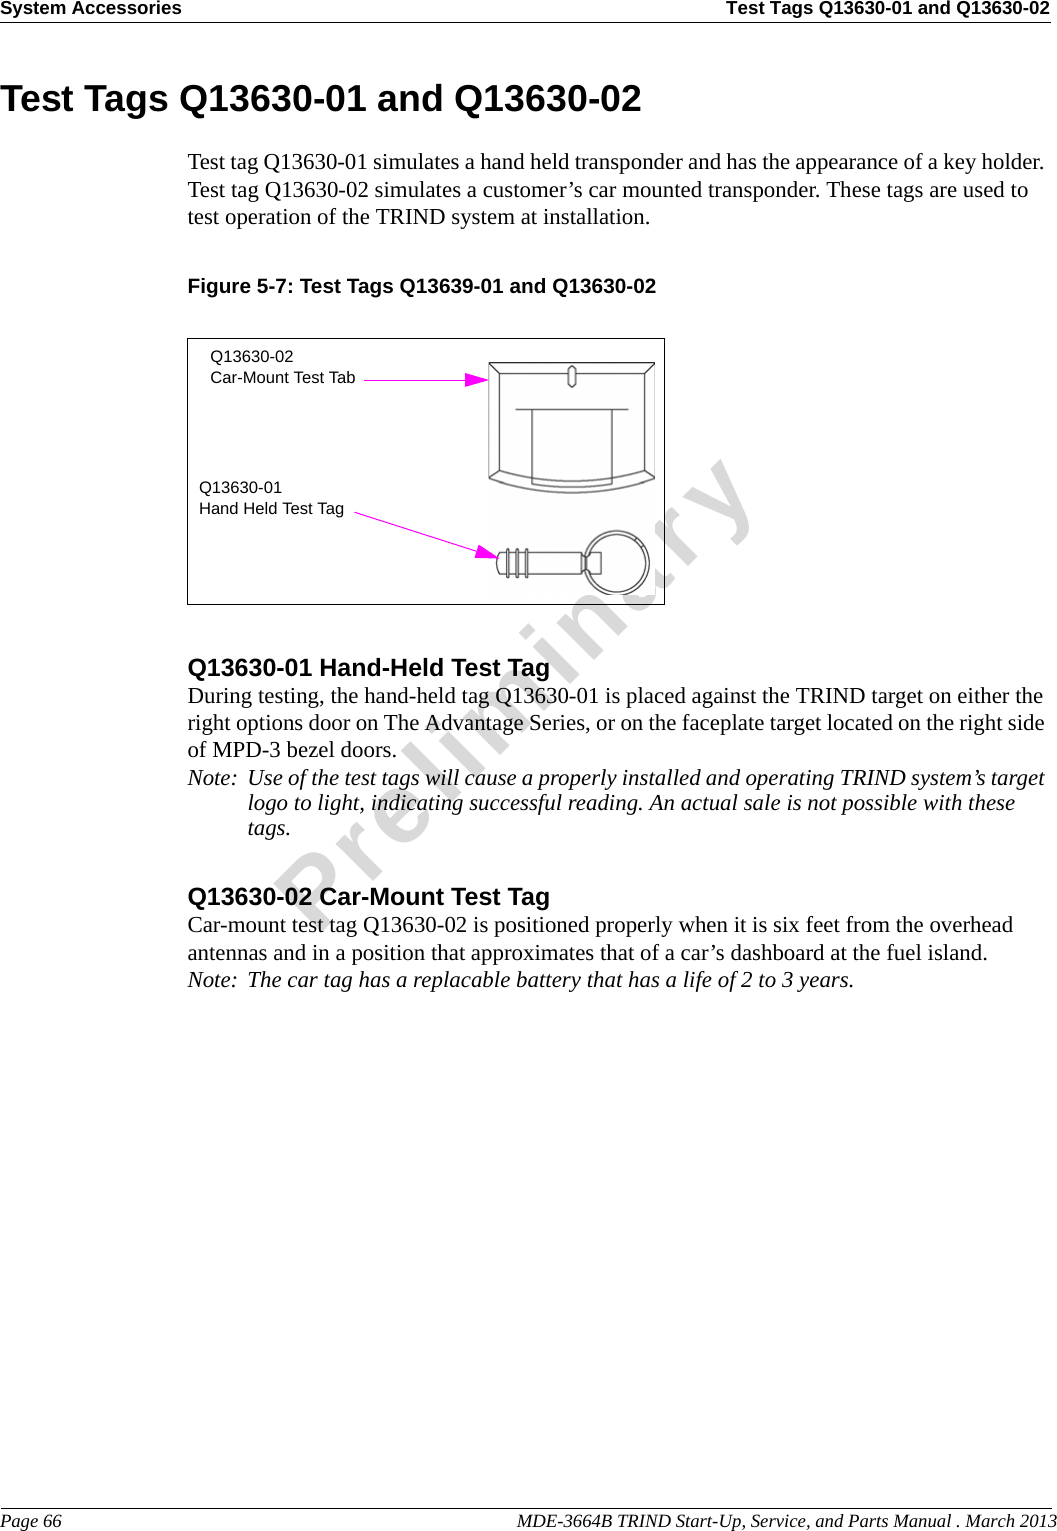 System Accessories Test Tags Q13630-01 and Q13630-02Page 66                                                                                                  MDE-3664B TRIND Start-Up, Service, and Parts Manual . March 2013PreliminaryTest Tags Q13630-01 and Q13630-02Test tag Q13630-01 simulates a hand held transponder and has the appearance of a key holder. Test tag Q13630-02 simulates a customer’s car mounted transponder. These tags are used to test operation of the TRIND system at installation.Figure 5-7: Test Tags Q13639-01 and Q13630-02Q13630-02Car-Mount Test TabQ13630-01Hand Held Test TagQ13630-01 Hand-Held Test TagDuring testing, the hand-held tag Q13630-01 is placed against the TRIND target on either the right options door on The Advantage Series, or on the faceplate target located on the right side of MPD-3 bezel doors.Note: Use of the test tags will cause a properly installed and operating TRIND system’s target logo to light, indicating successful reading. An actual sale is not possible with these tags.Q13630-02 Car-Mount Test TagCar-mount test tag Q13630-02 is positioned properly when it is six feet from the overhead antennas and in a position that approximates that of a car’s dashboard at the fuel island.Note: The car tag has a replacable battery that has a life of 2 to 3 years.